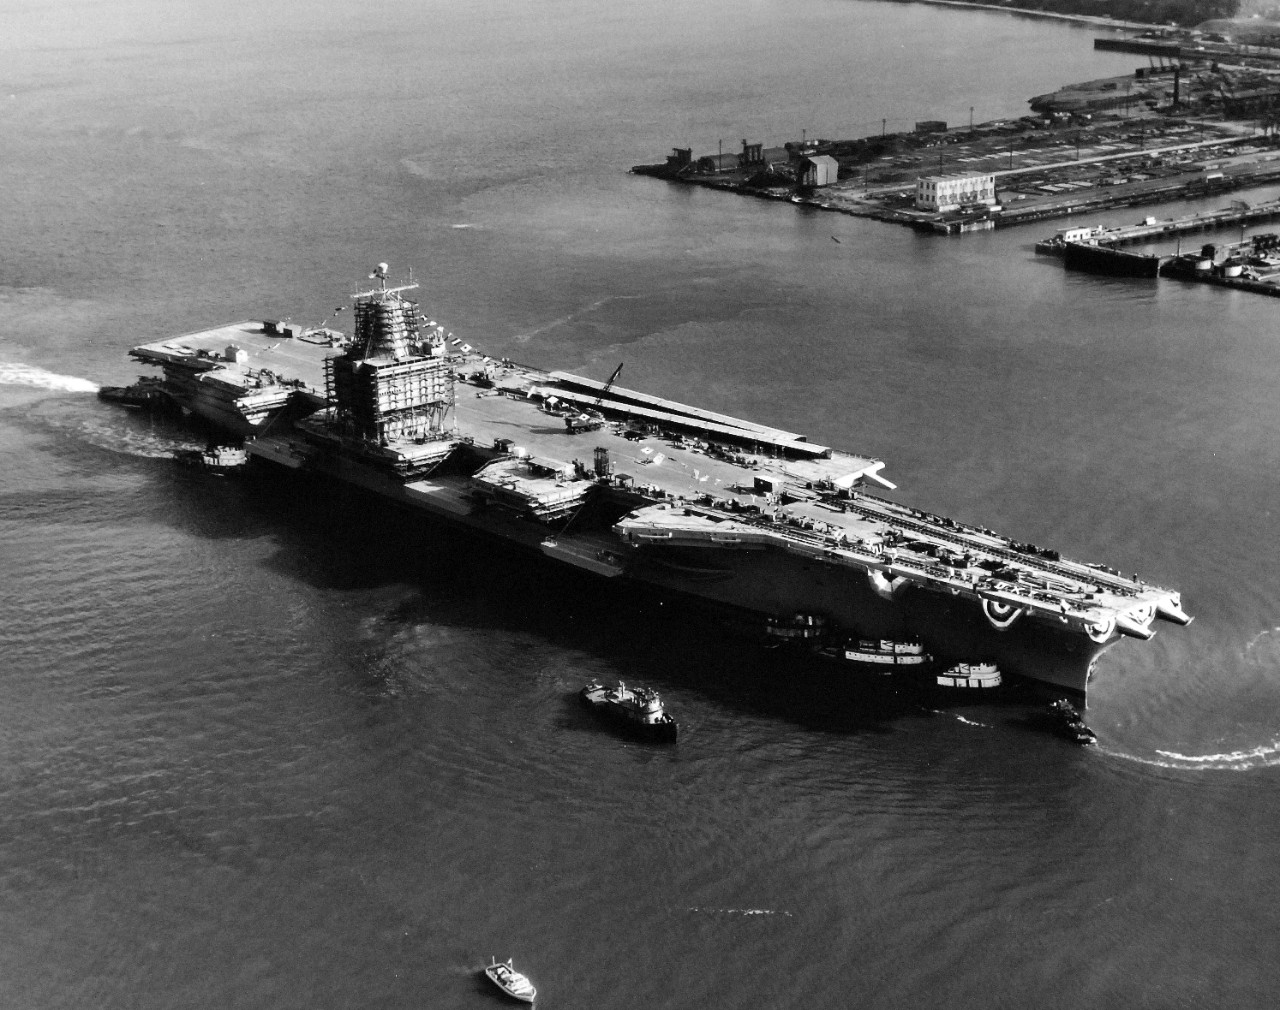 330-PSA-229-60 (USN 1050180):  USS Enterprise (CVN-65), 1960.   Aerial view of the launching at Newport News Shipbuilding and Drydock Company, Newport News, Virginia, September 24, 1960.   Shown:  Tugs move the aircraft carrier after launching.   Official U.S. Navy Photograph, now in the collections of the National Archives.   (2015/09/09).  